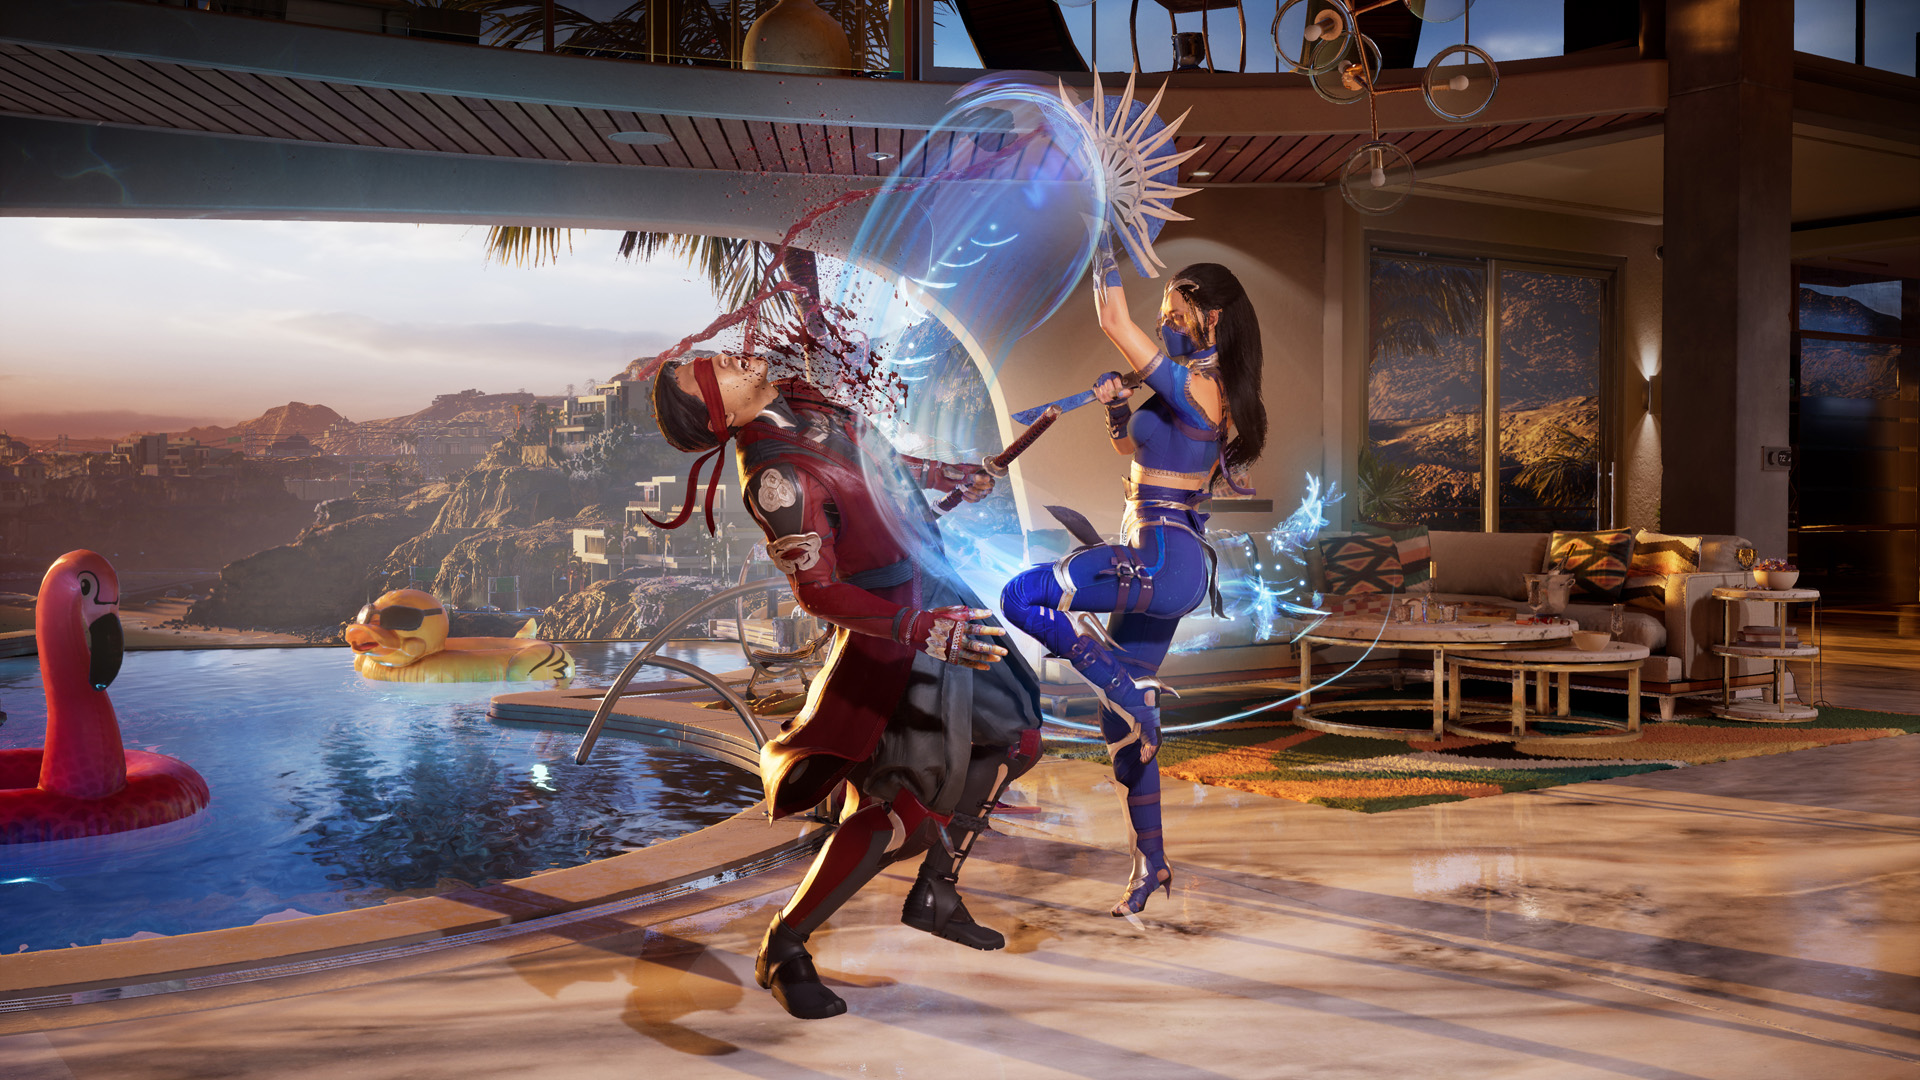 Mortal Kombat 1 Matches Shown Off in 4K in New Gameplay Showcase Video